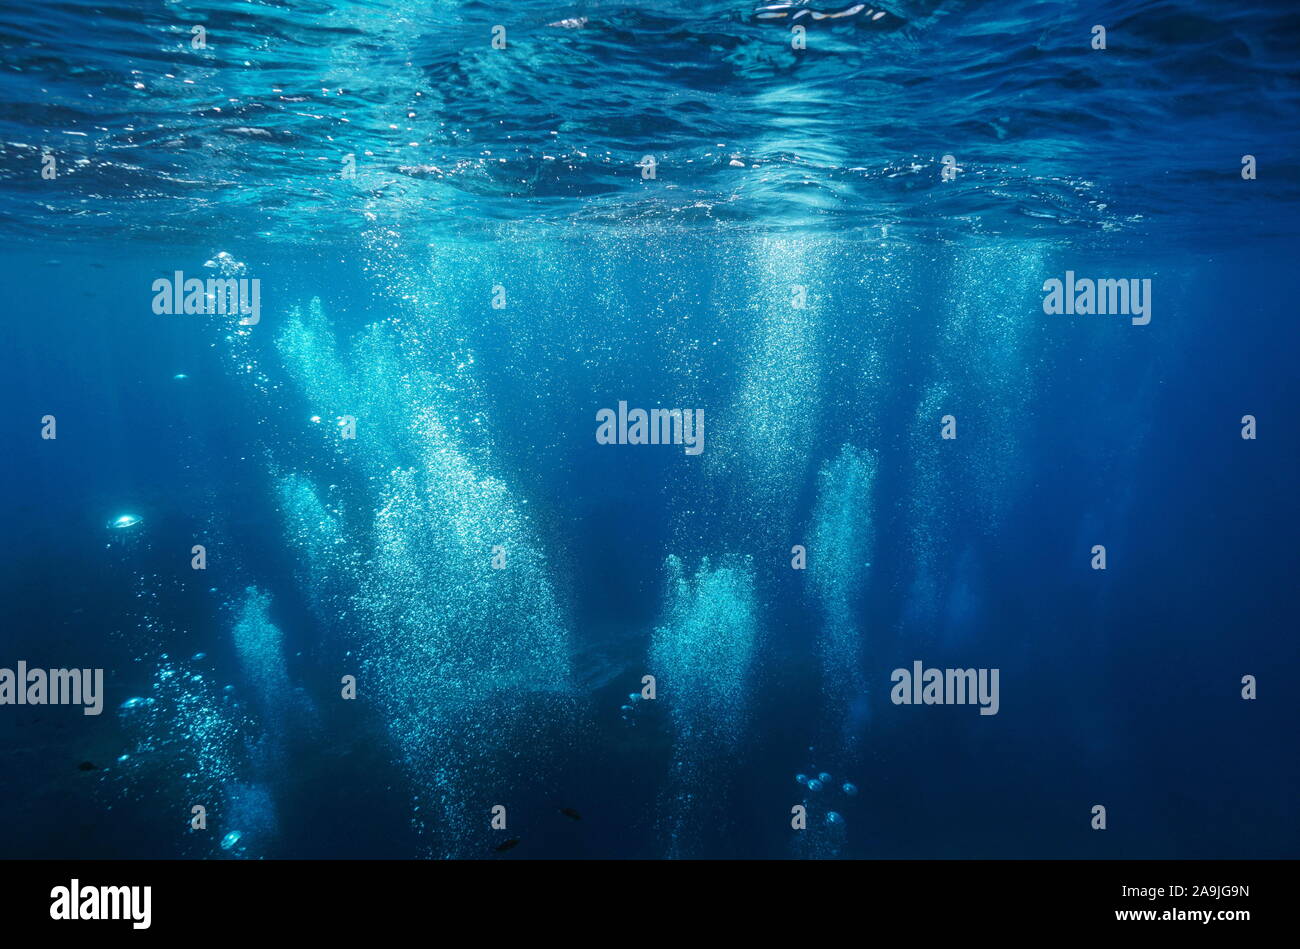 Air bubbles underwater sea rising to water surface, natural scene, Mediterranean, France Stock Photo